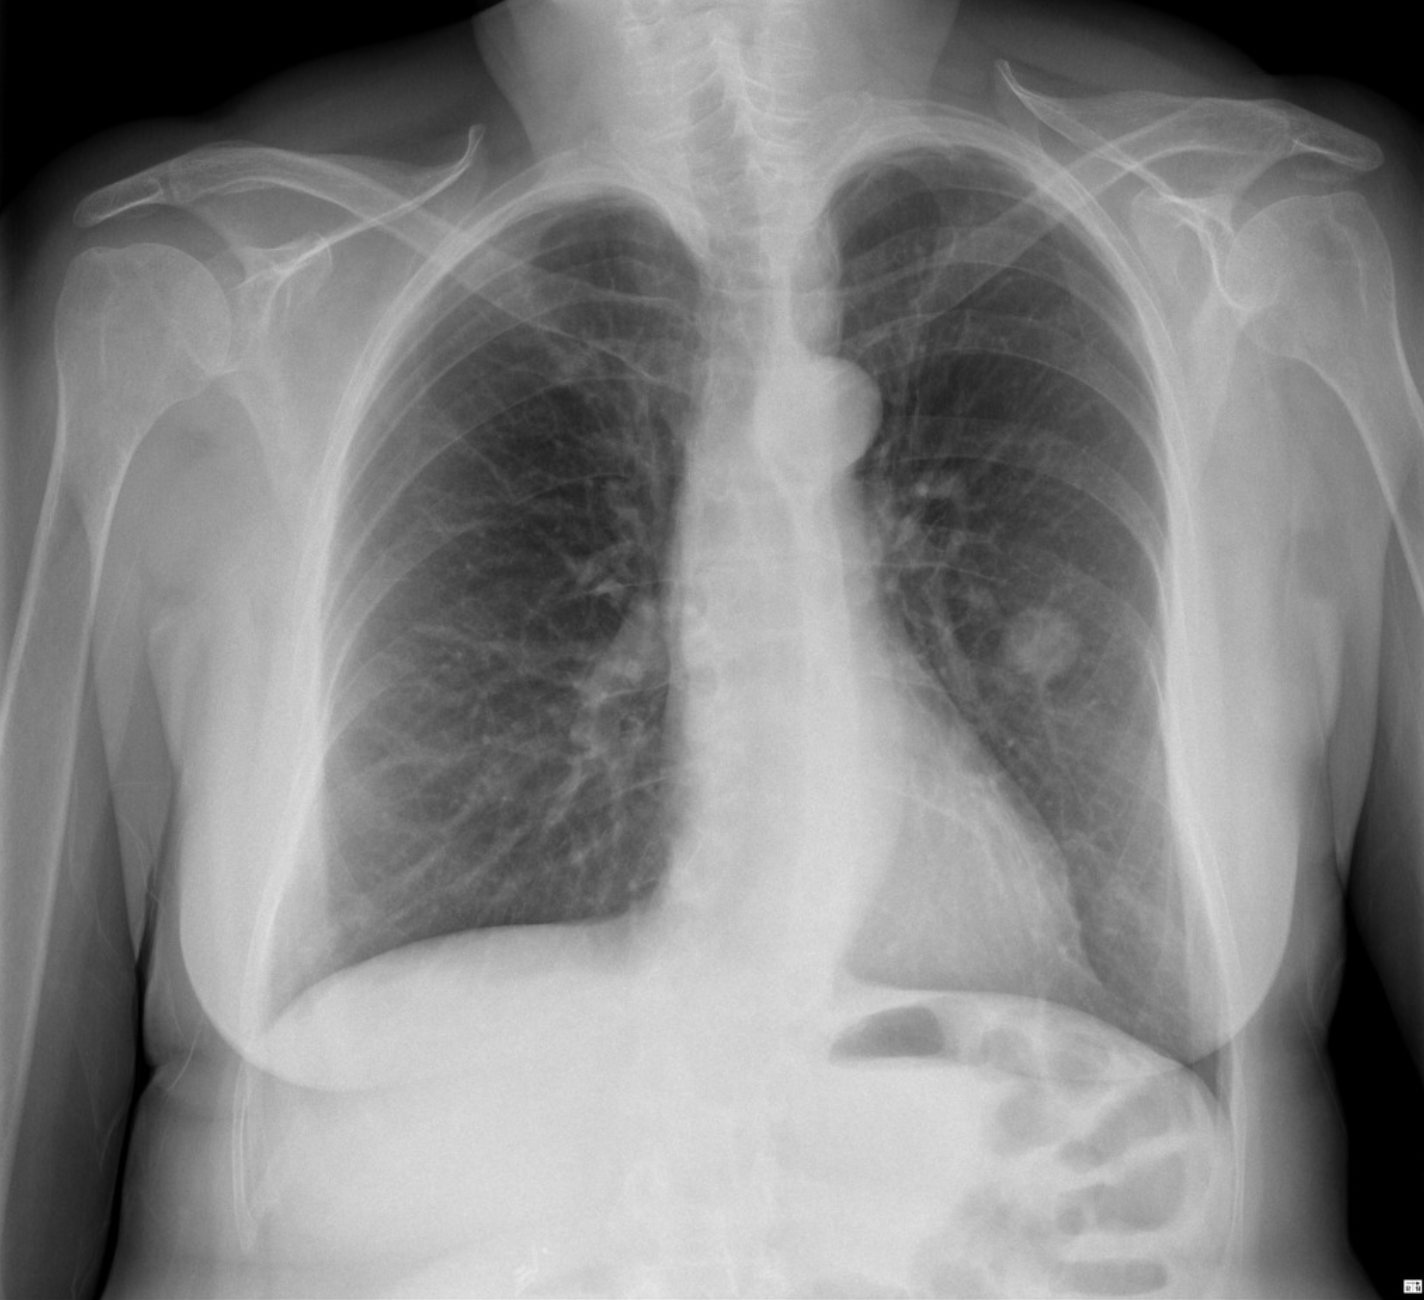 Frontal chest x-ray (CXR) shows a well circumscribed, smooth margin lesion in the left middle lobe.